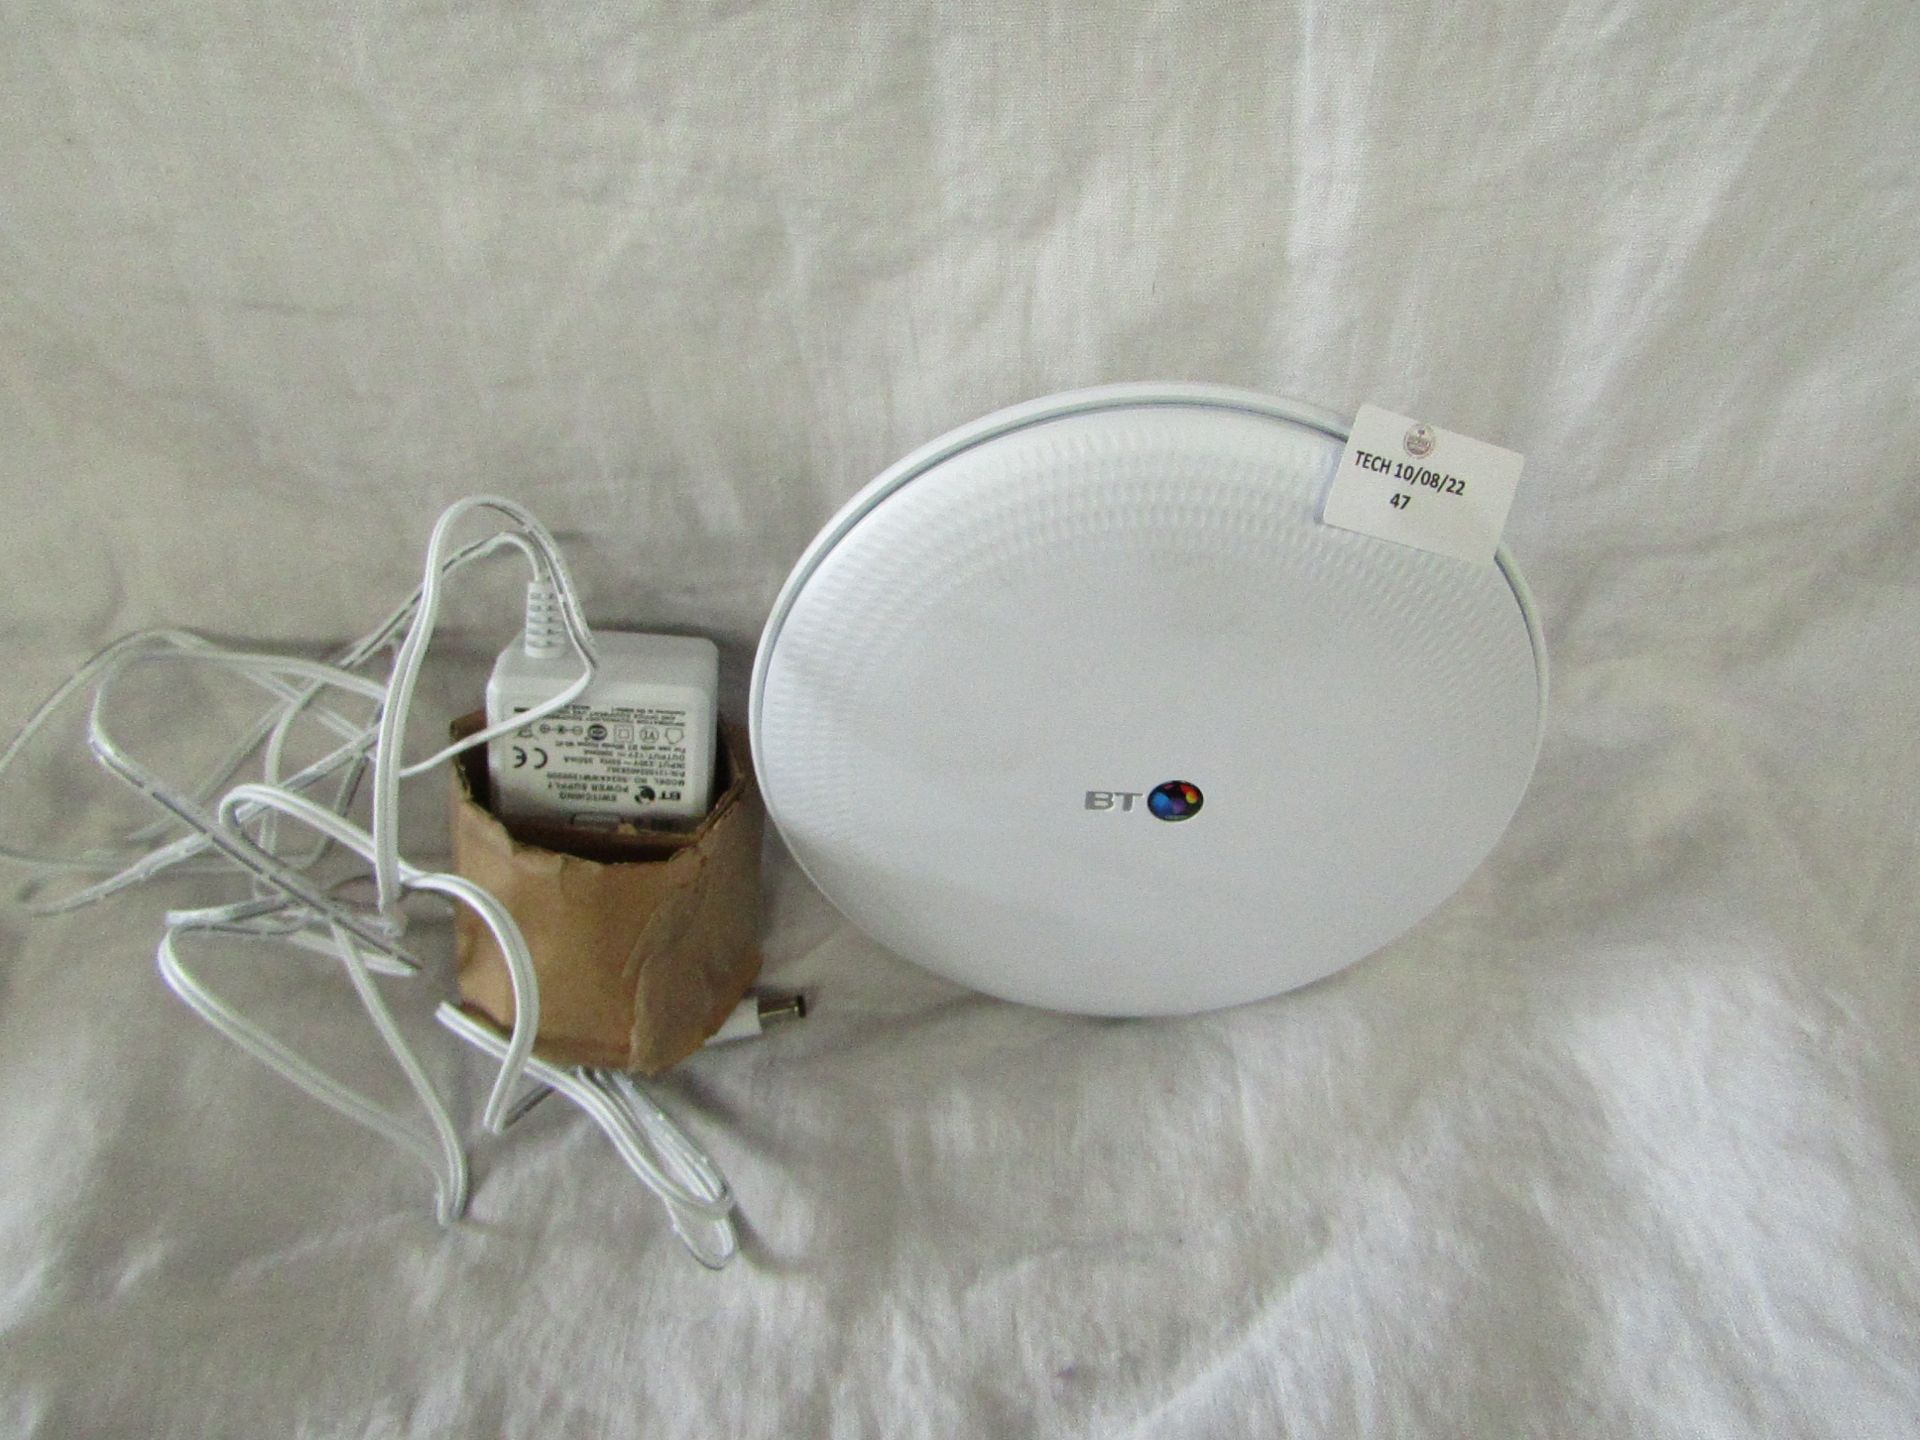 BT - Add-on disc for Whole Home Wi-Fi - White - Untested, No Packaging.